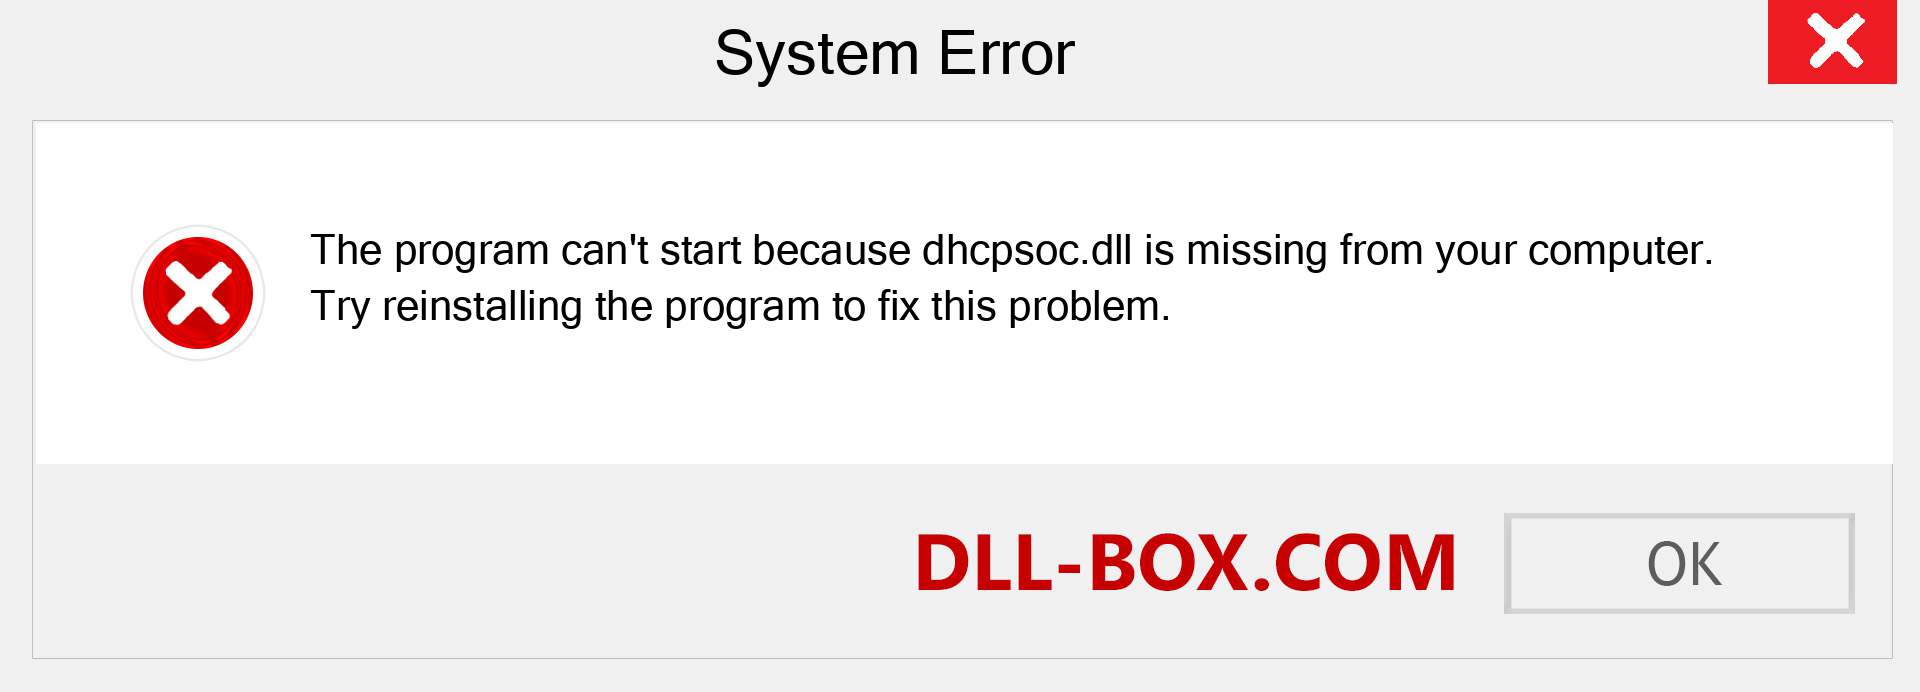  dhcpsoc.dll file is missing?. Download for Windows 7, 8, 10 - Fix  dhcpsoc dll Missing Error on Windows, photos, images